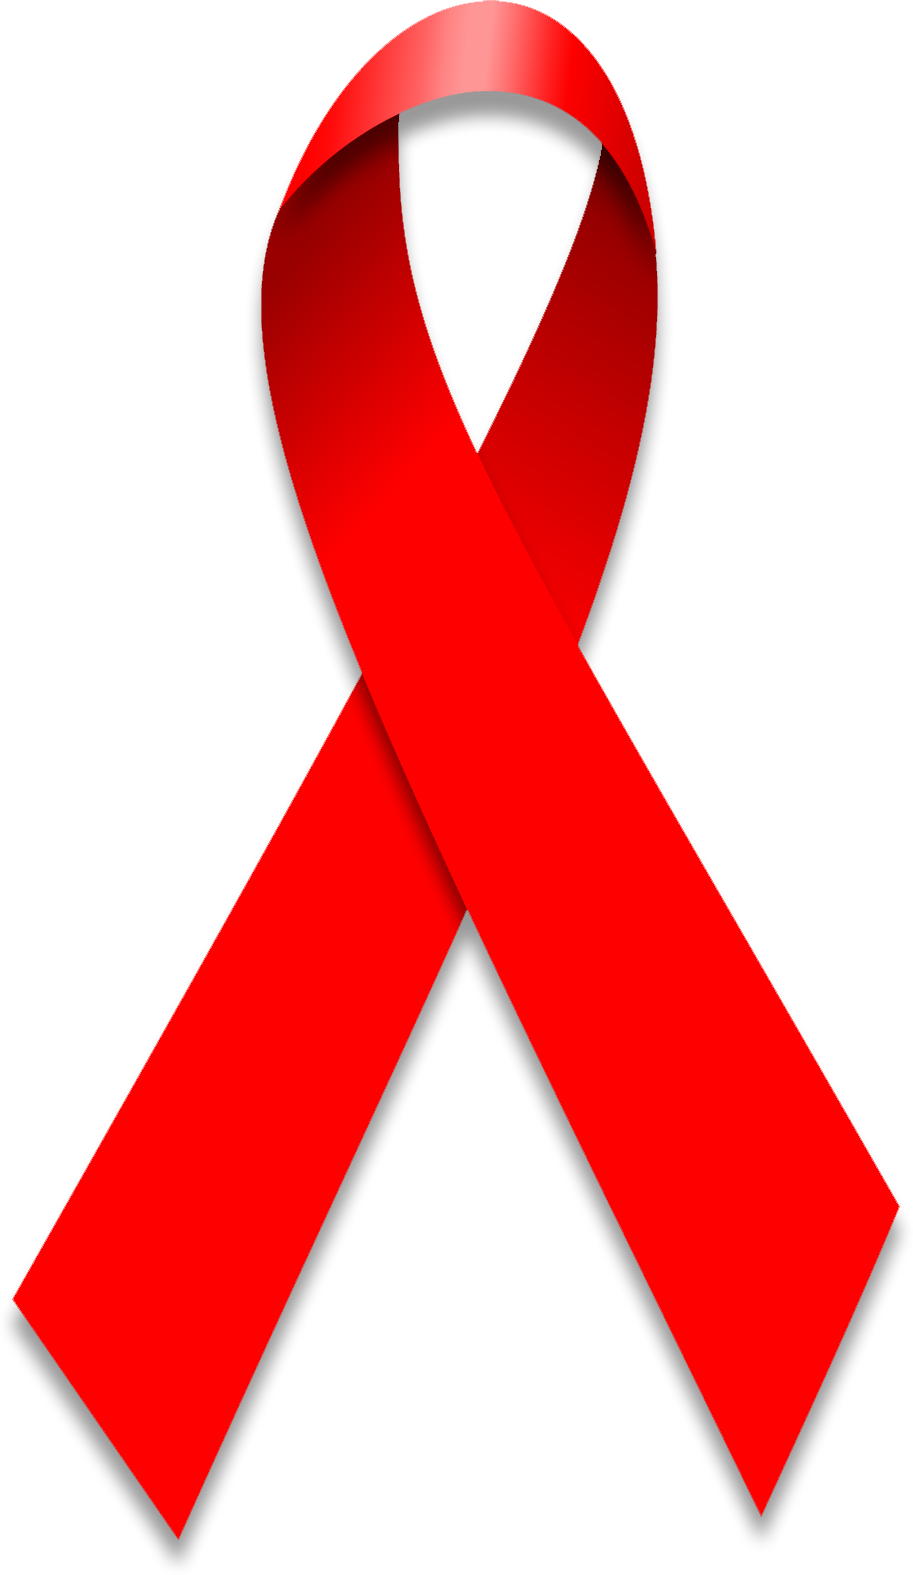 World AIDS Day PNG Image File